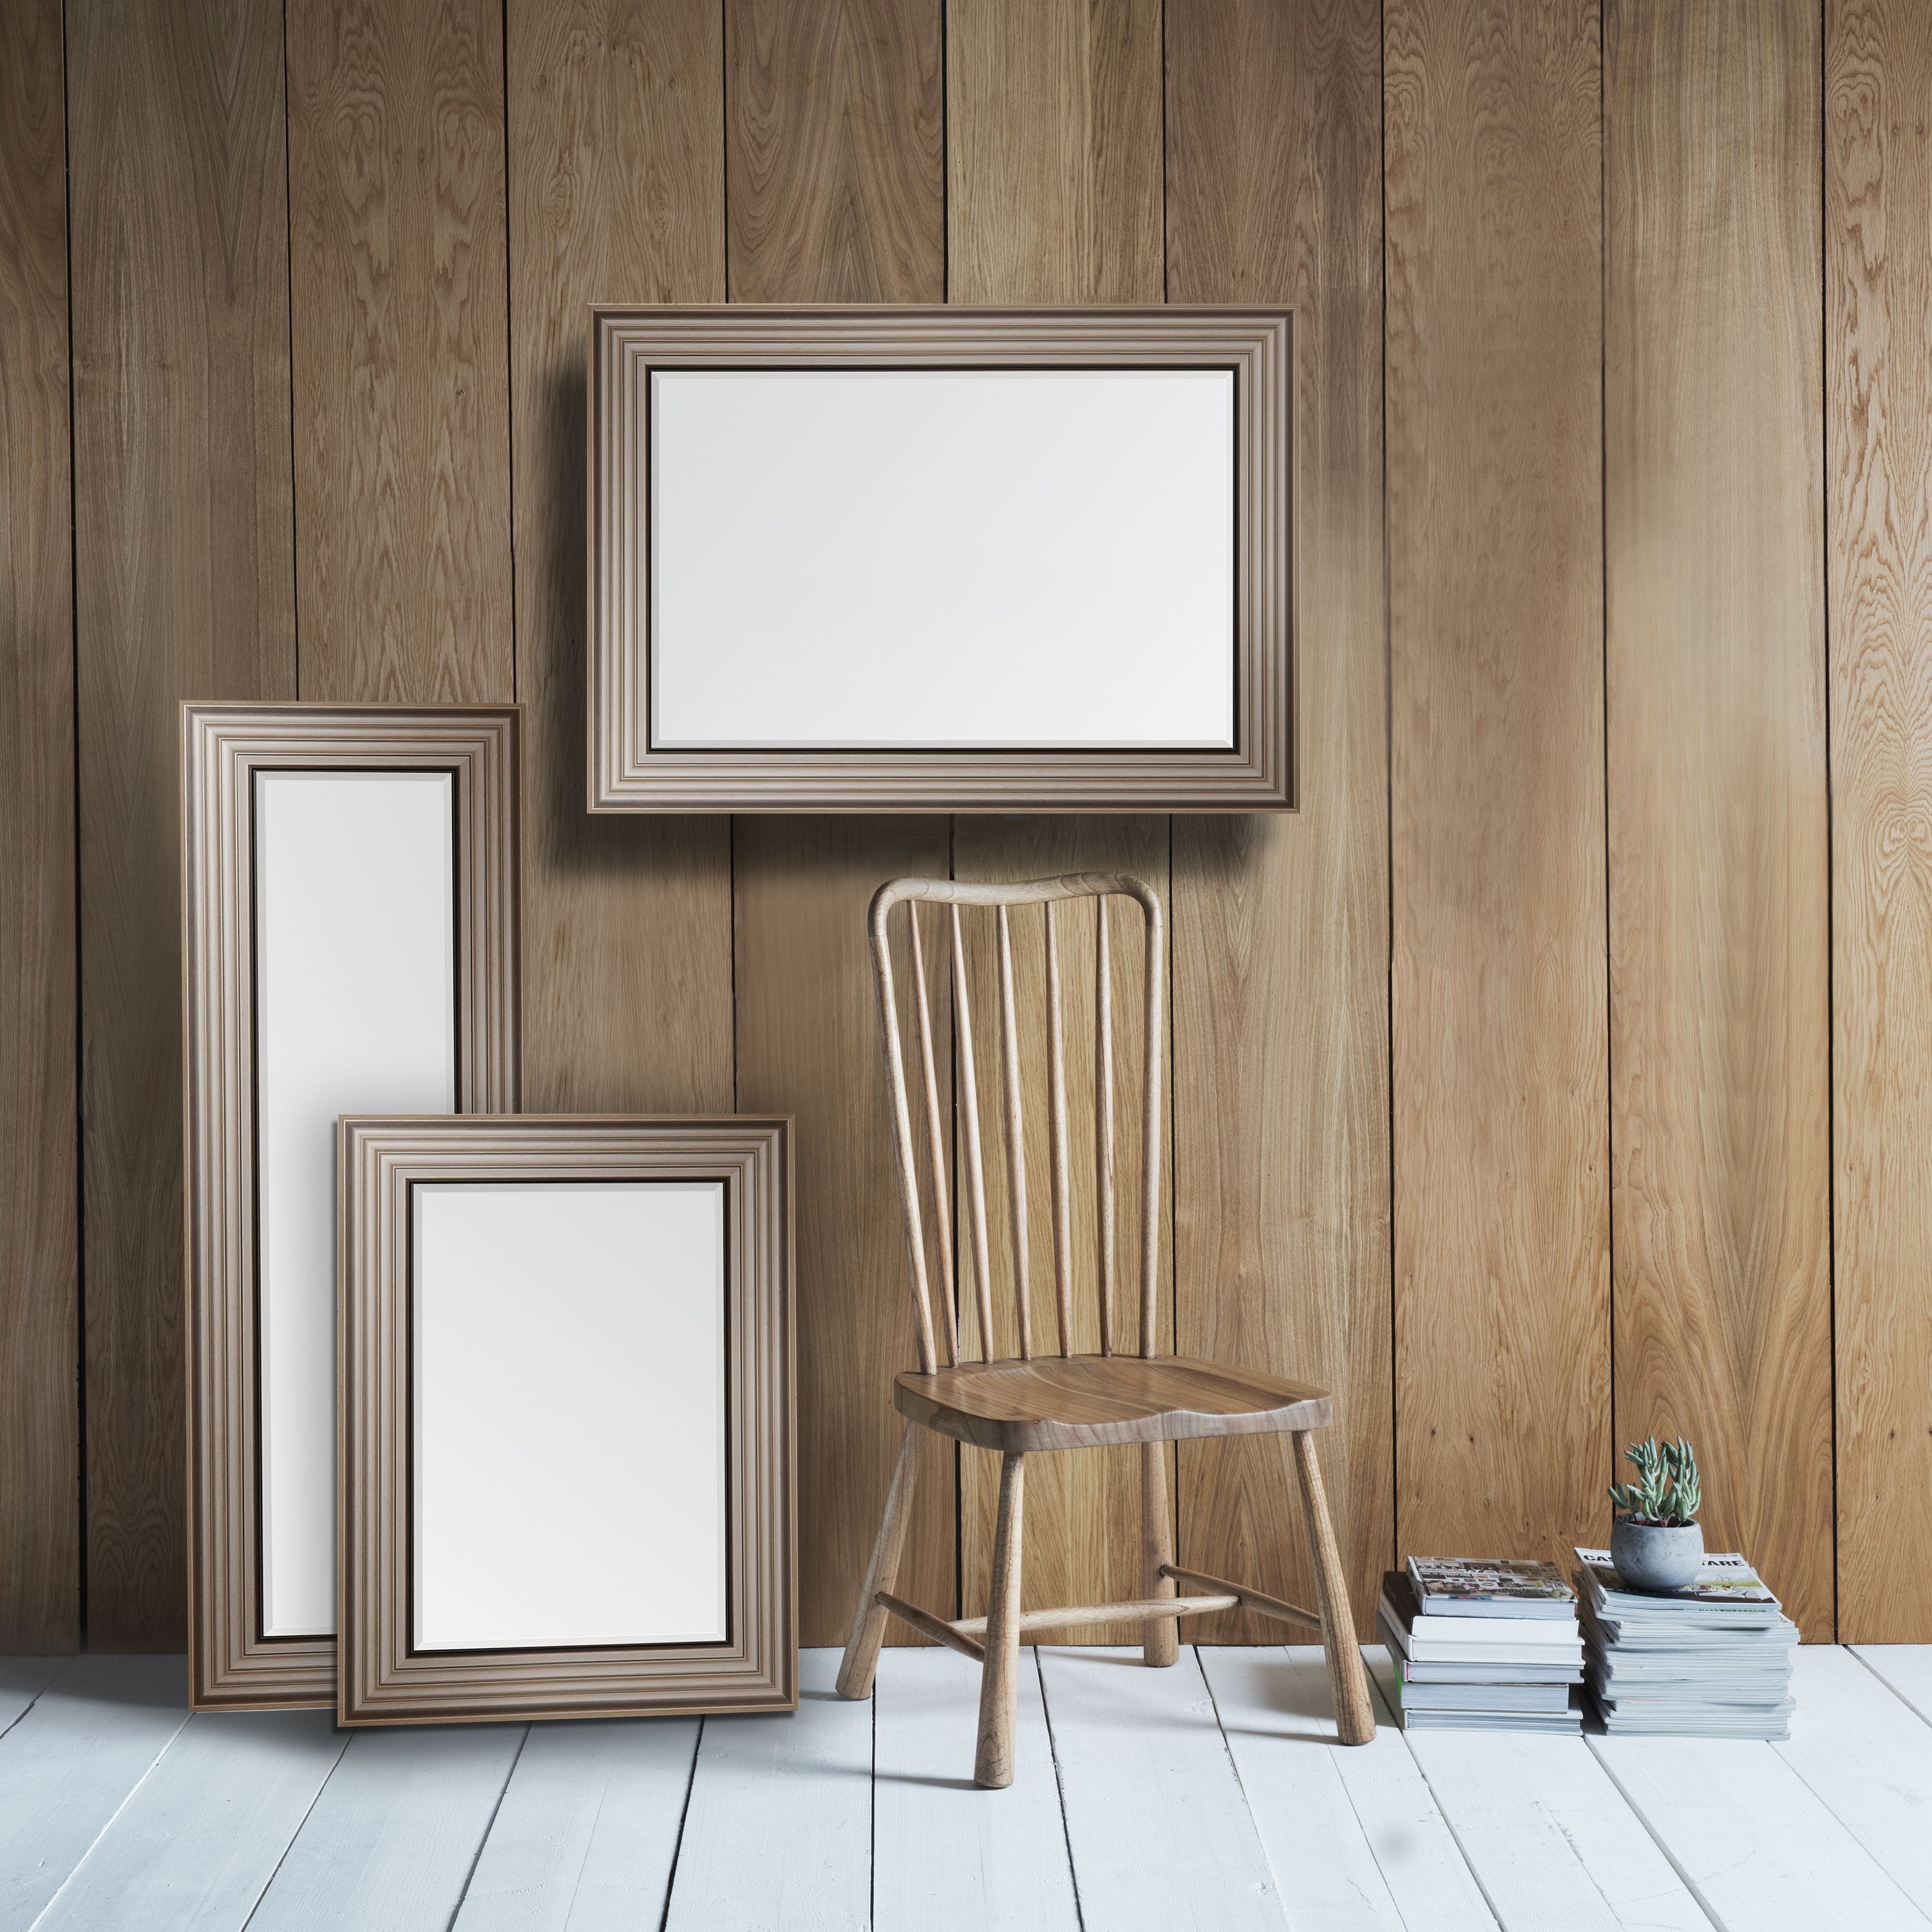 Colours Laverna Brown Silver effect Ridged Rectangular Wall-mounted Framed Mirror, (H)82cm (W)62cm